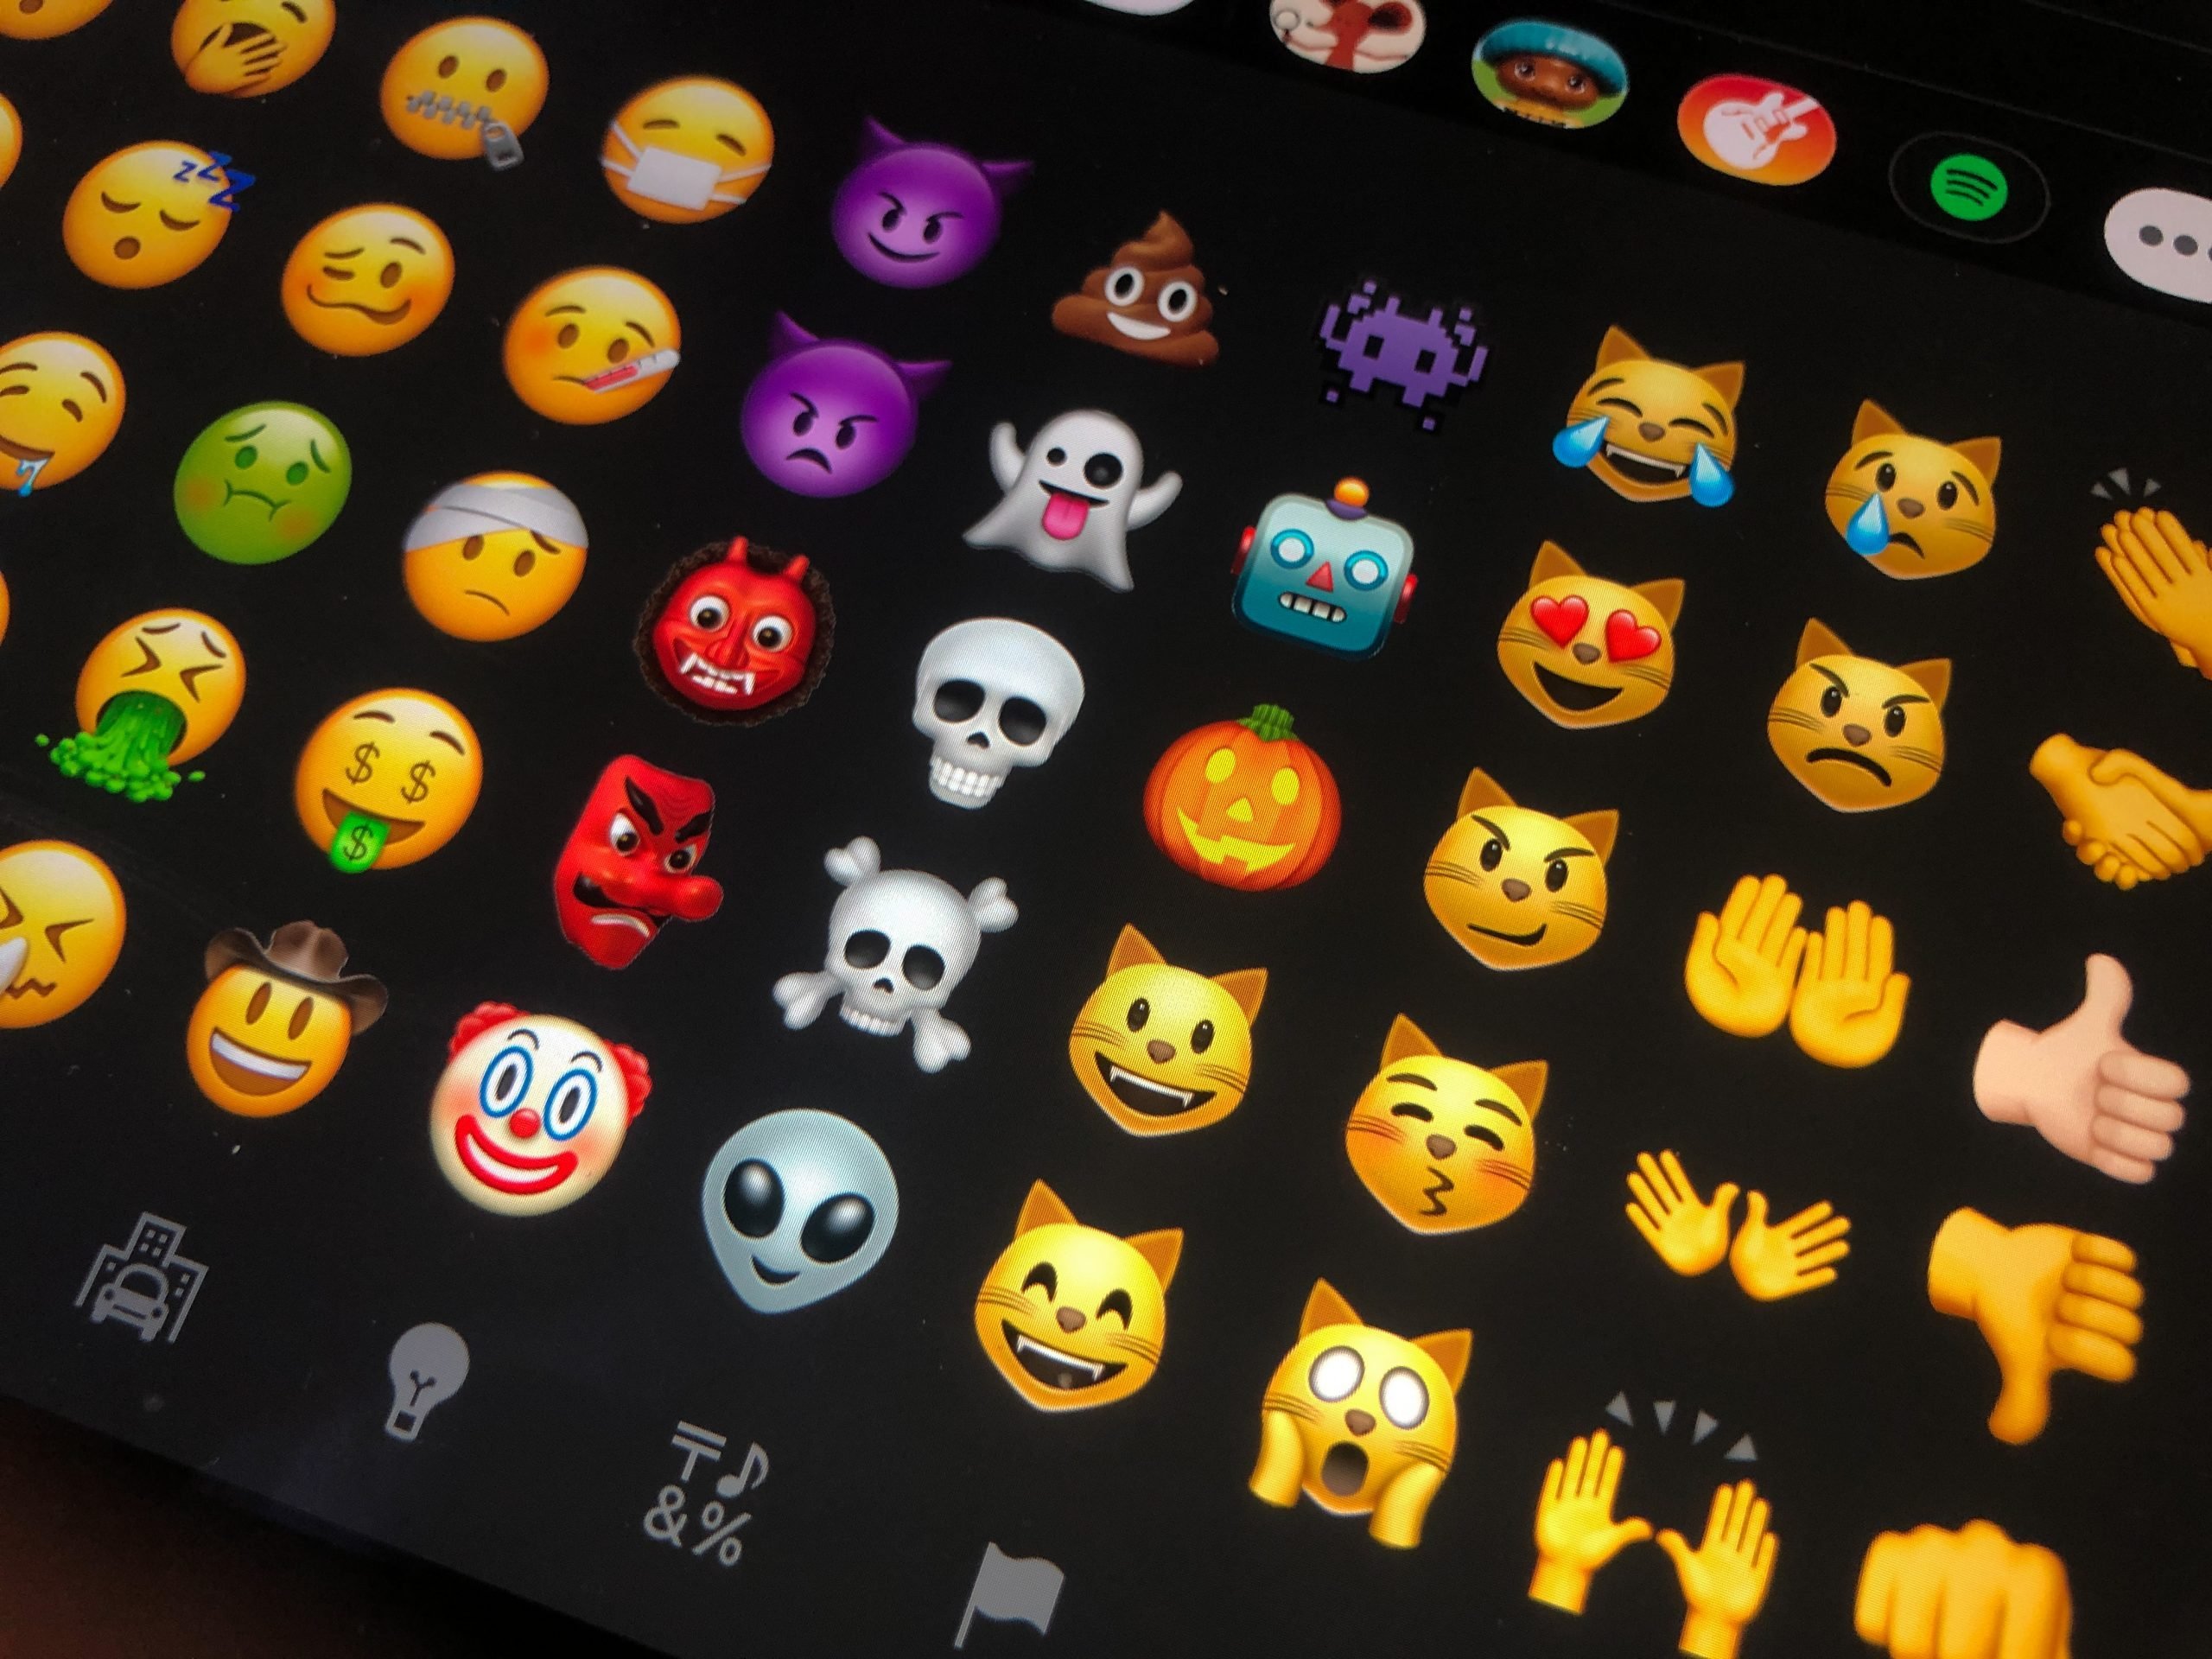 How do new emojis get created? It takes at least a year